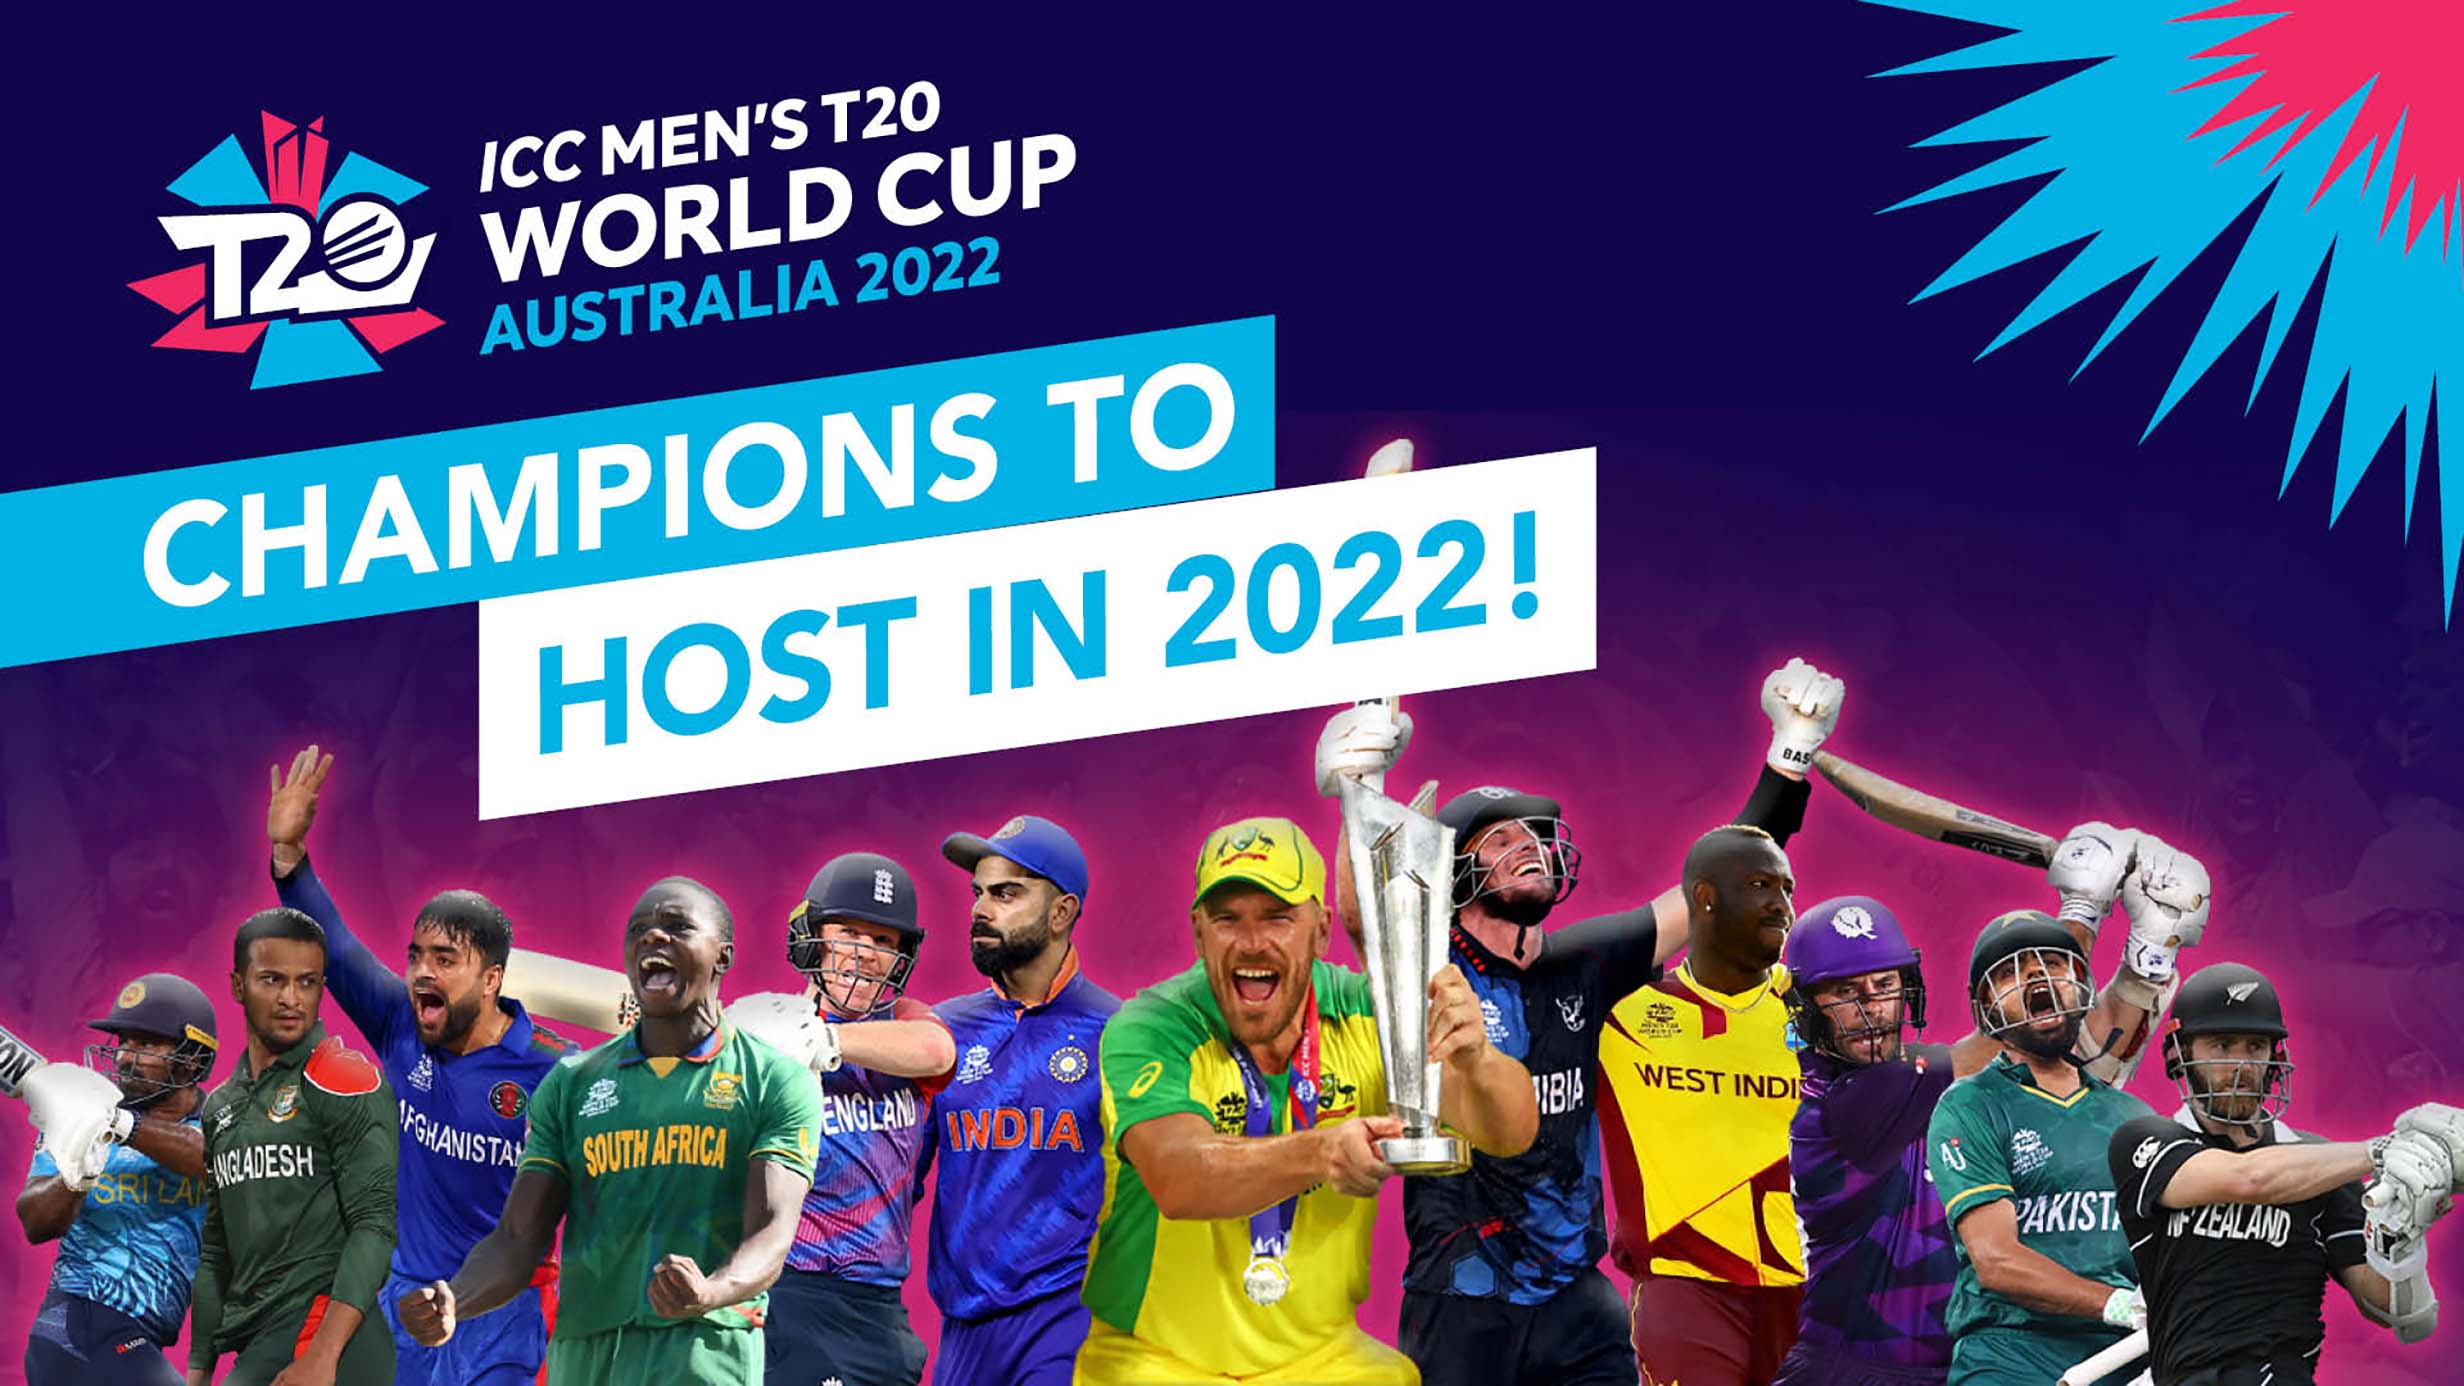 t20 world cup live free